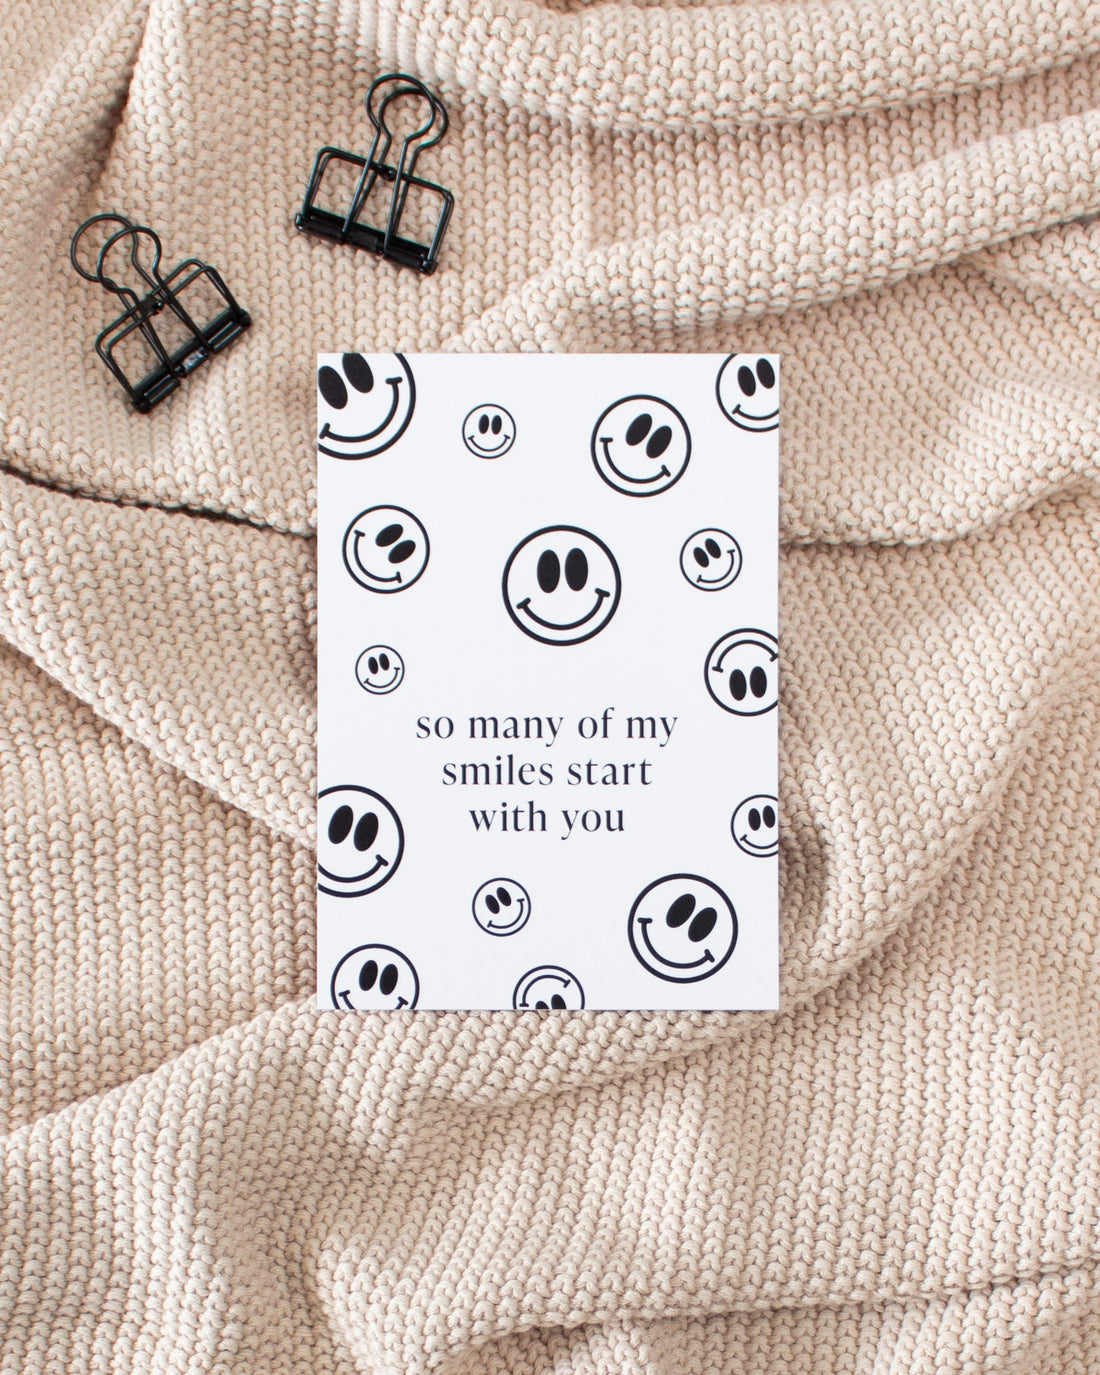 A white postcard laying on a beige knitted blanket with some black binder clips. The postcard is covered in black smiley faces of varying sizes with some text in the middle saying &quot;so many of my smiles start with you&quot;.